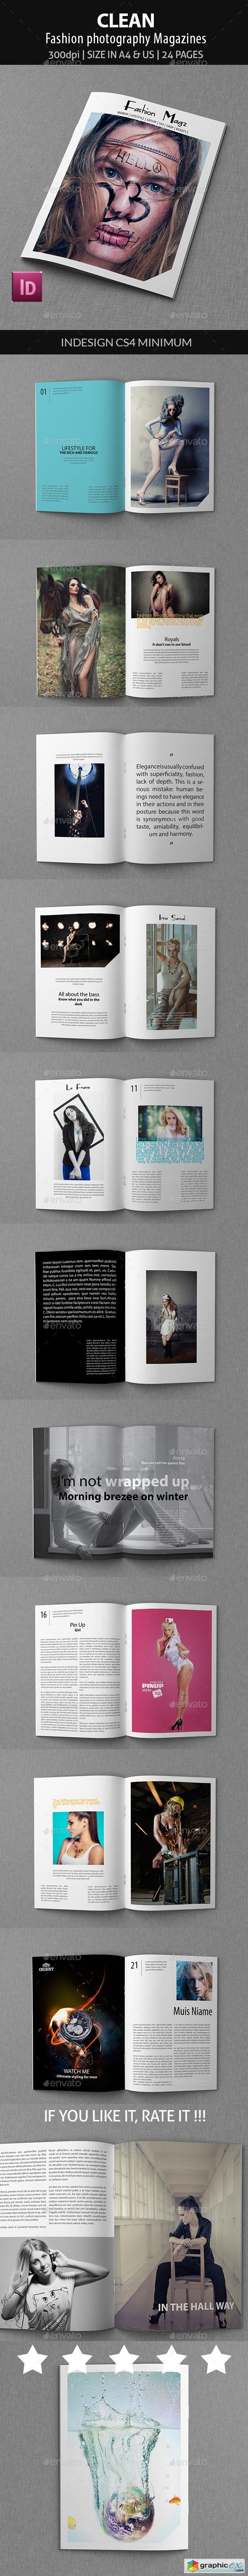 Clean - Fashion photography Magazines